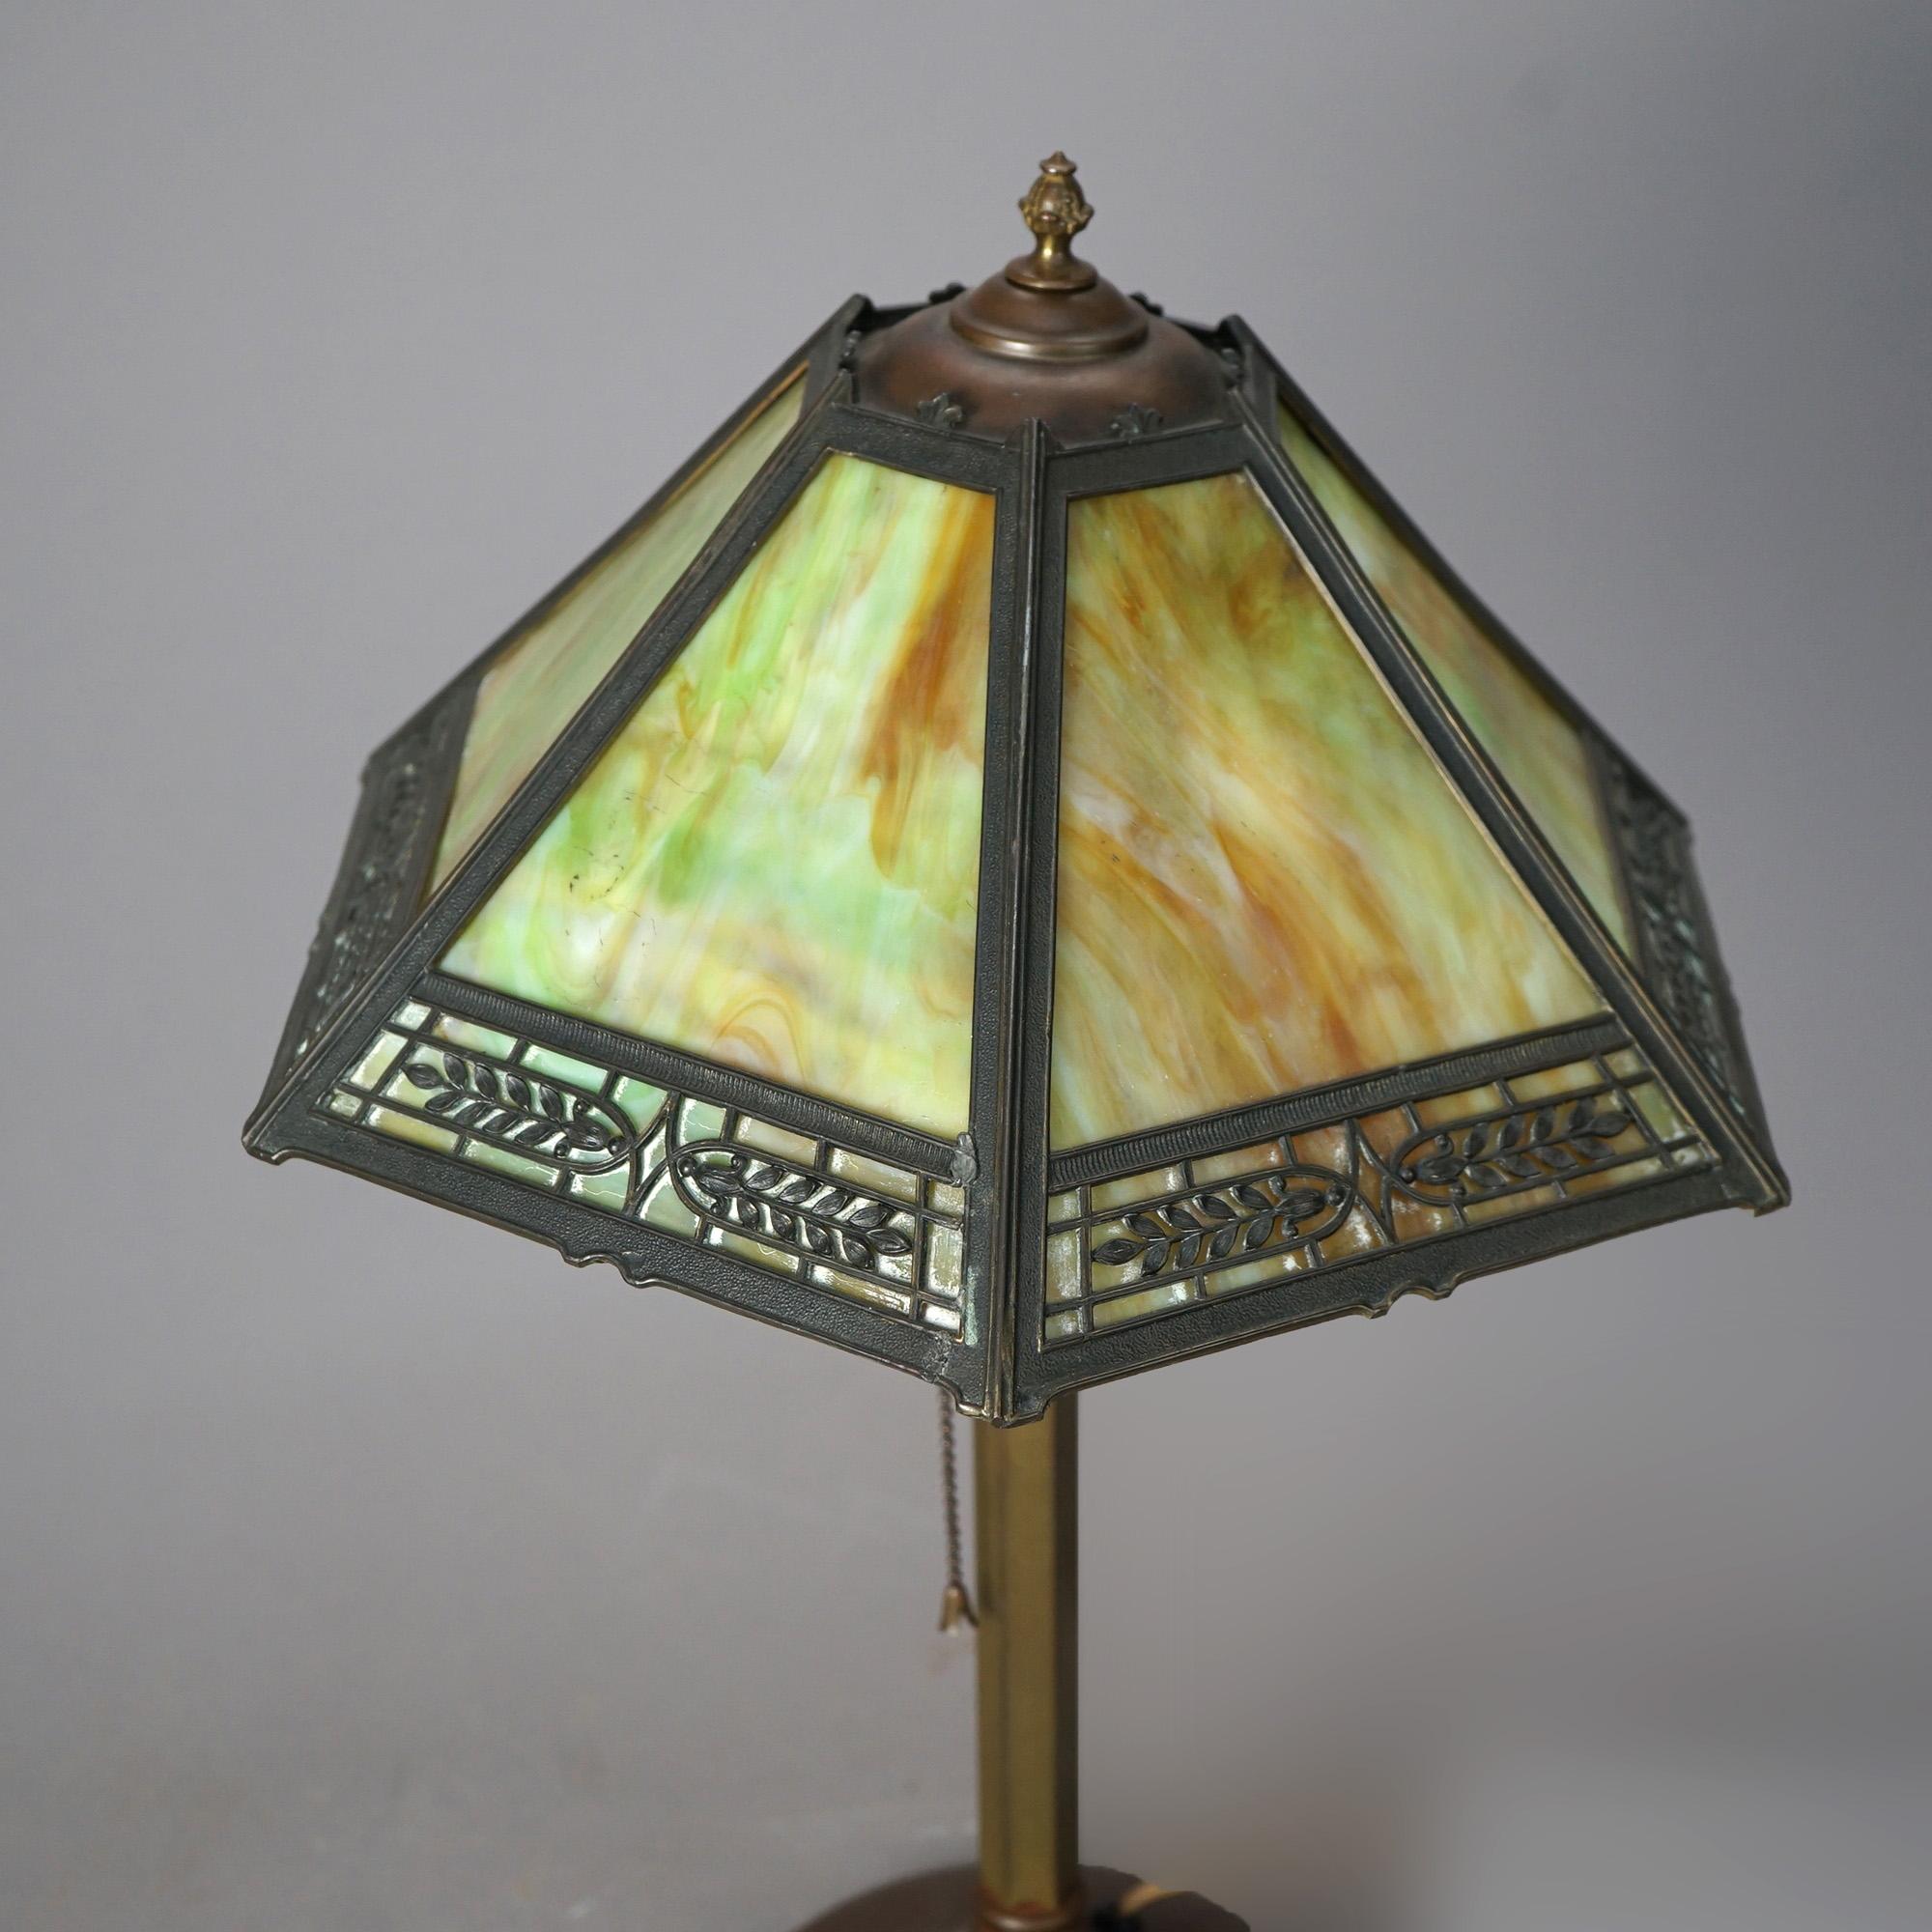 An antique Arts and Crafts Bradley & Hubbard table lamp offers shade with cast frame having pierced foliate band and housing slag glass panels over single cast base, c1920

Measures - 20.5